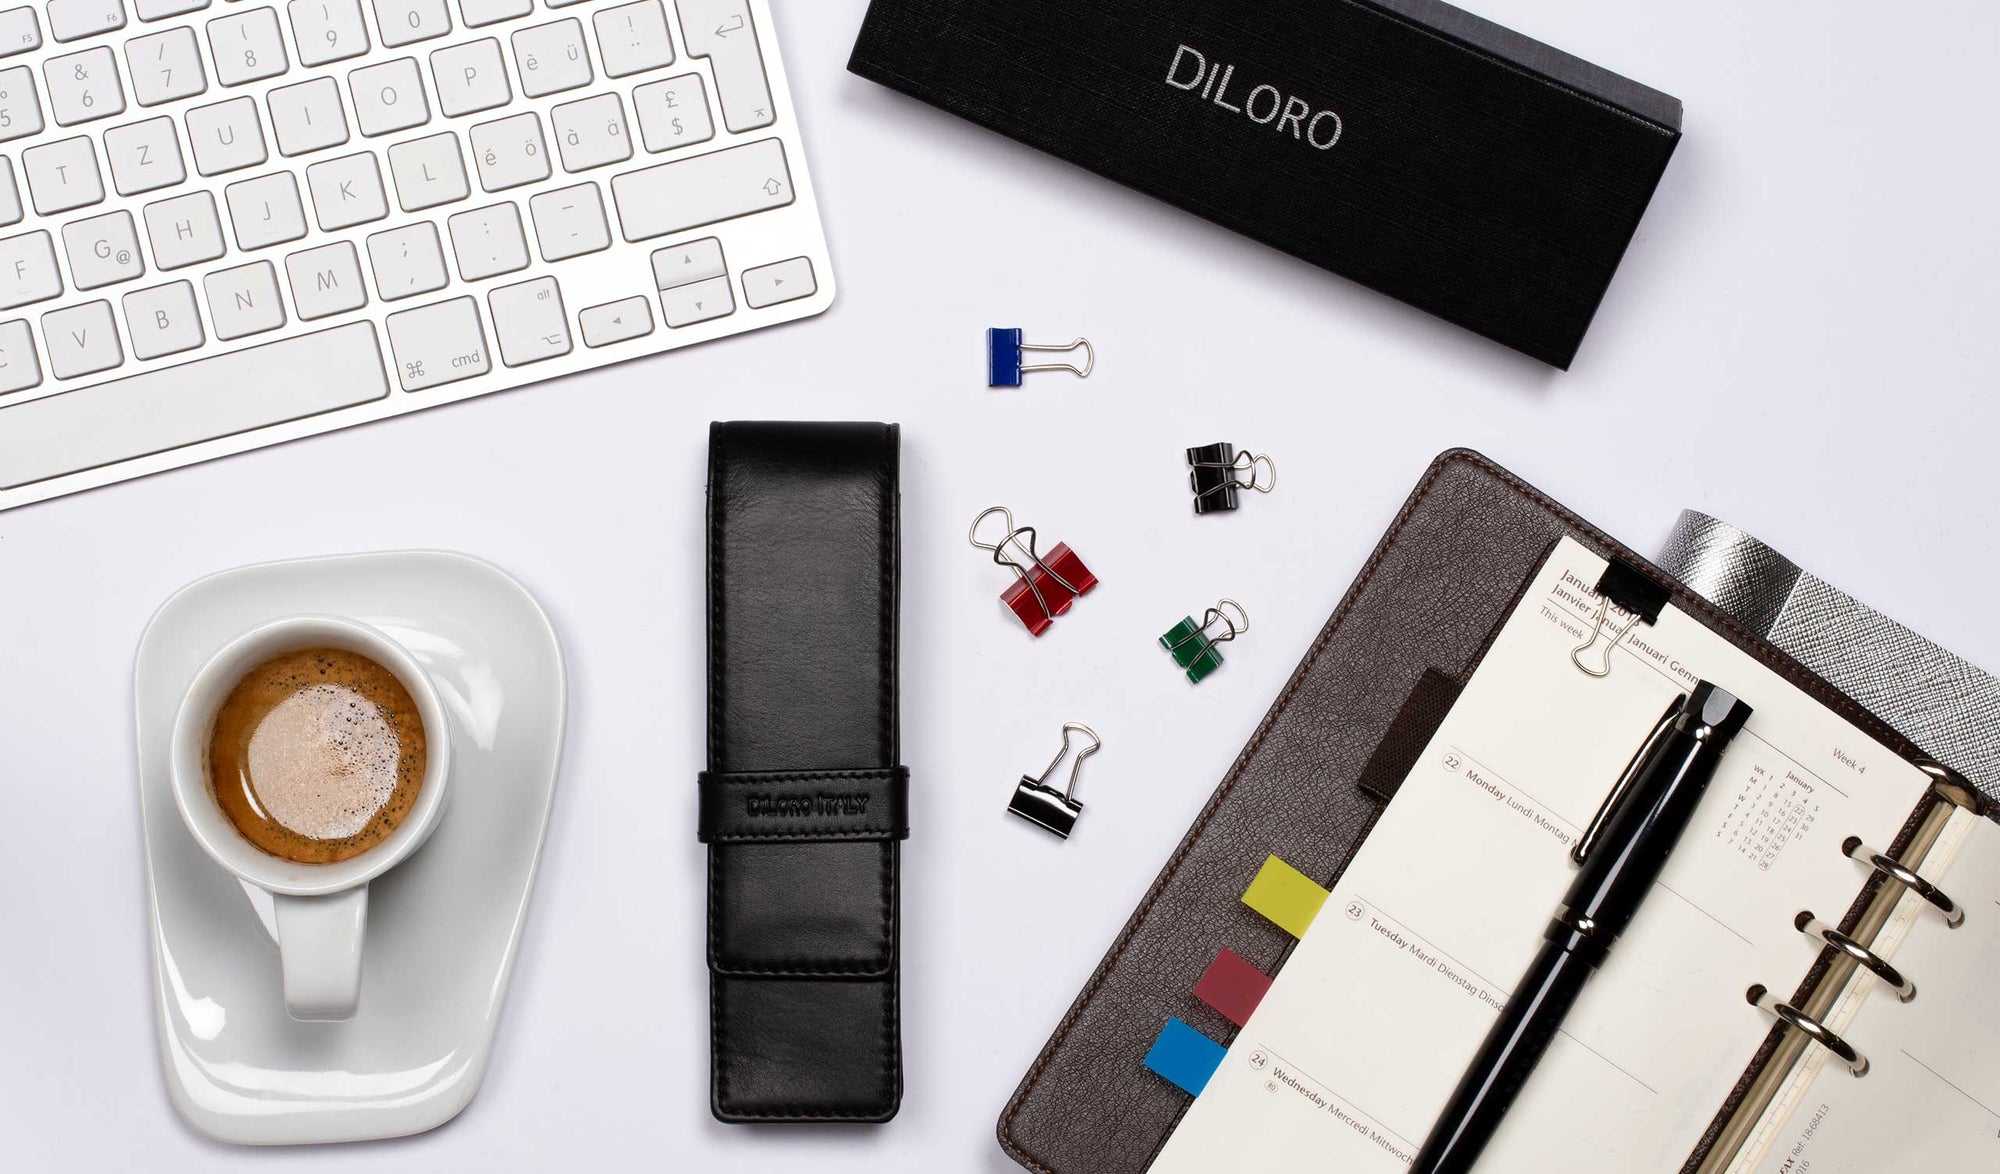 DiLoro Double Pen Case Holder in Top Quality, Full Grain Nappa Leather - Black (pens not included)